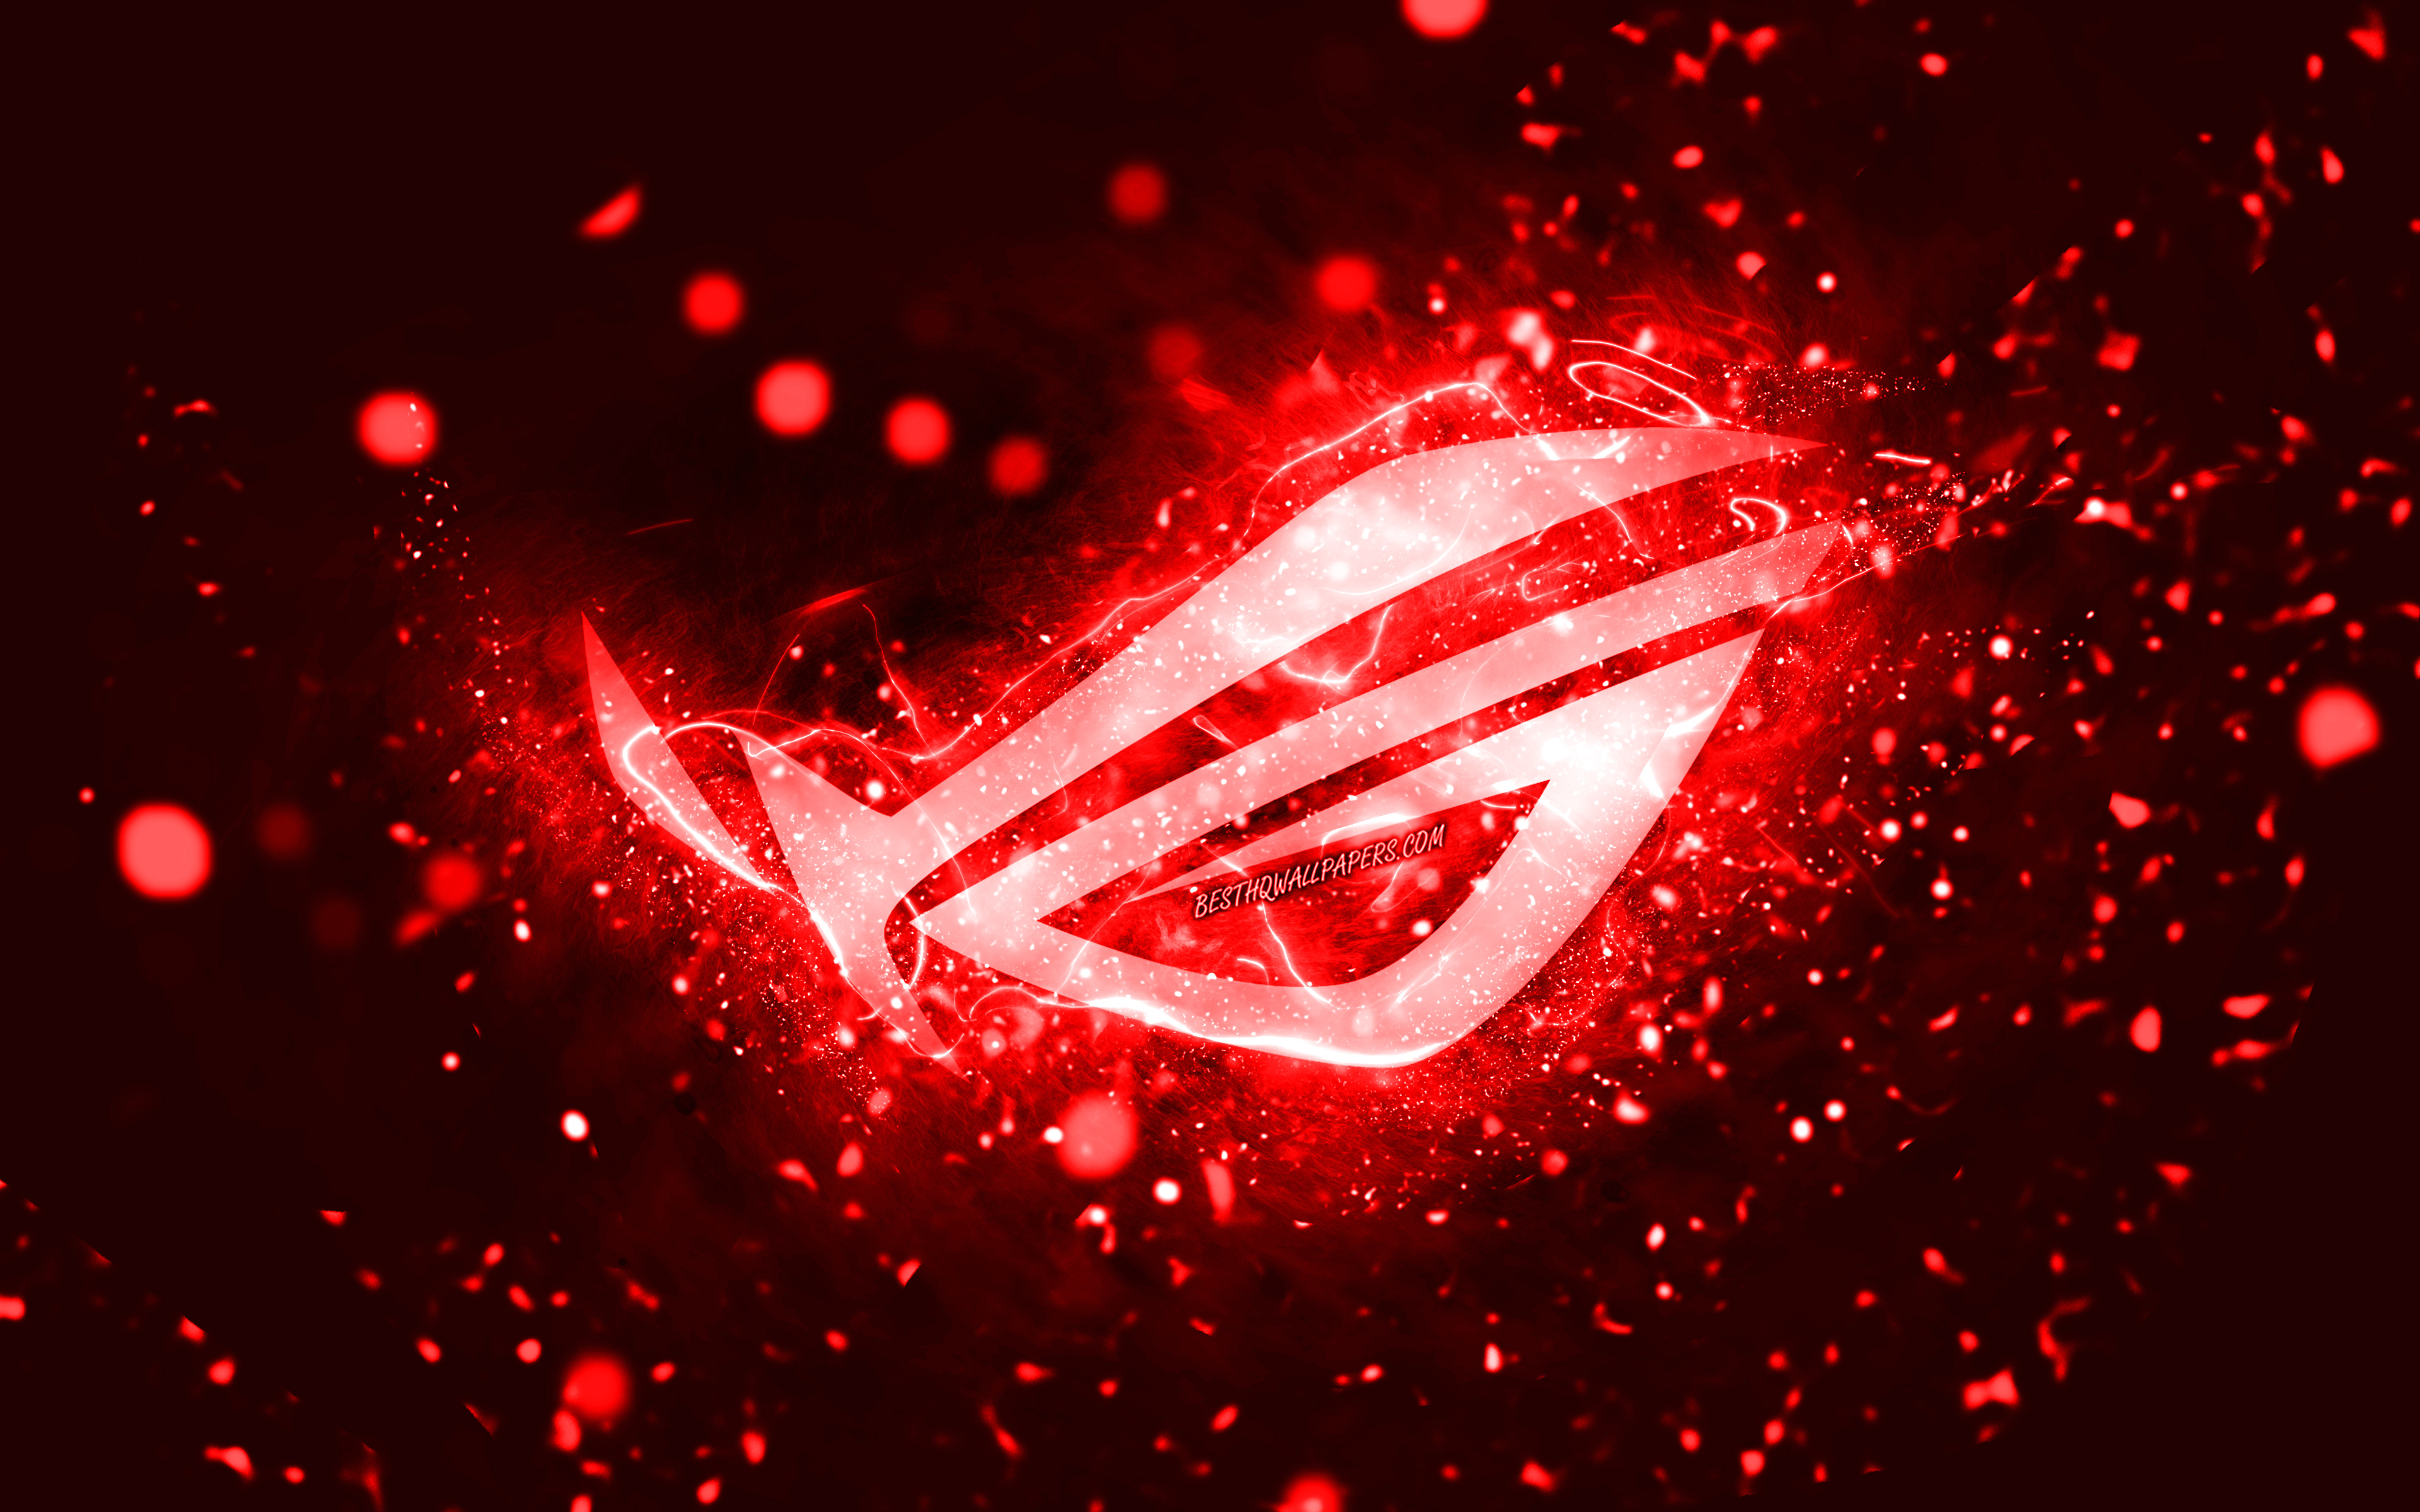 Download Wallpapers Rog Red Logo 4k Red Neon Lights Republic Of Gamers Creative Red Abstract Background Rog Logo Republic Of Gamers Logo Rog For Desktop With Resolution 3840x2400 High Quality Hd Pictures